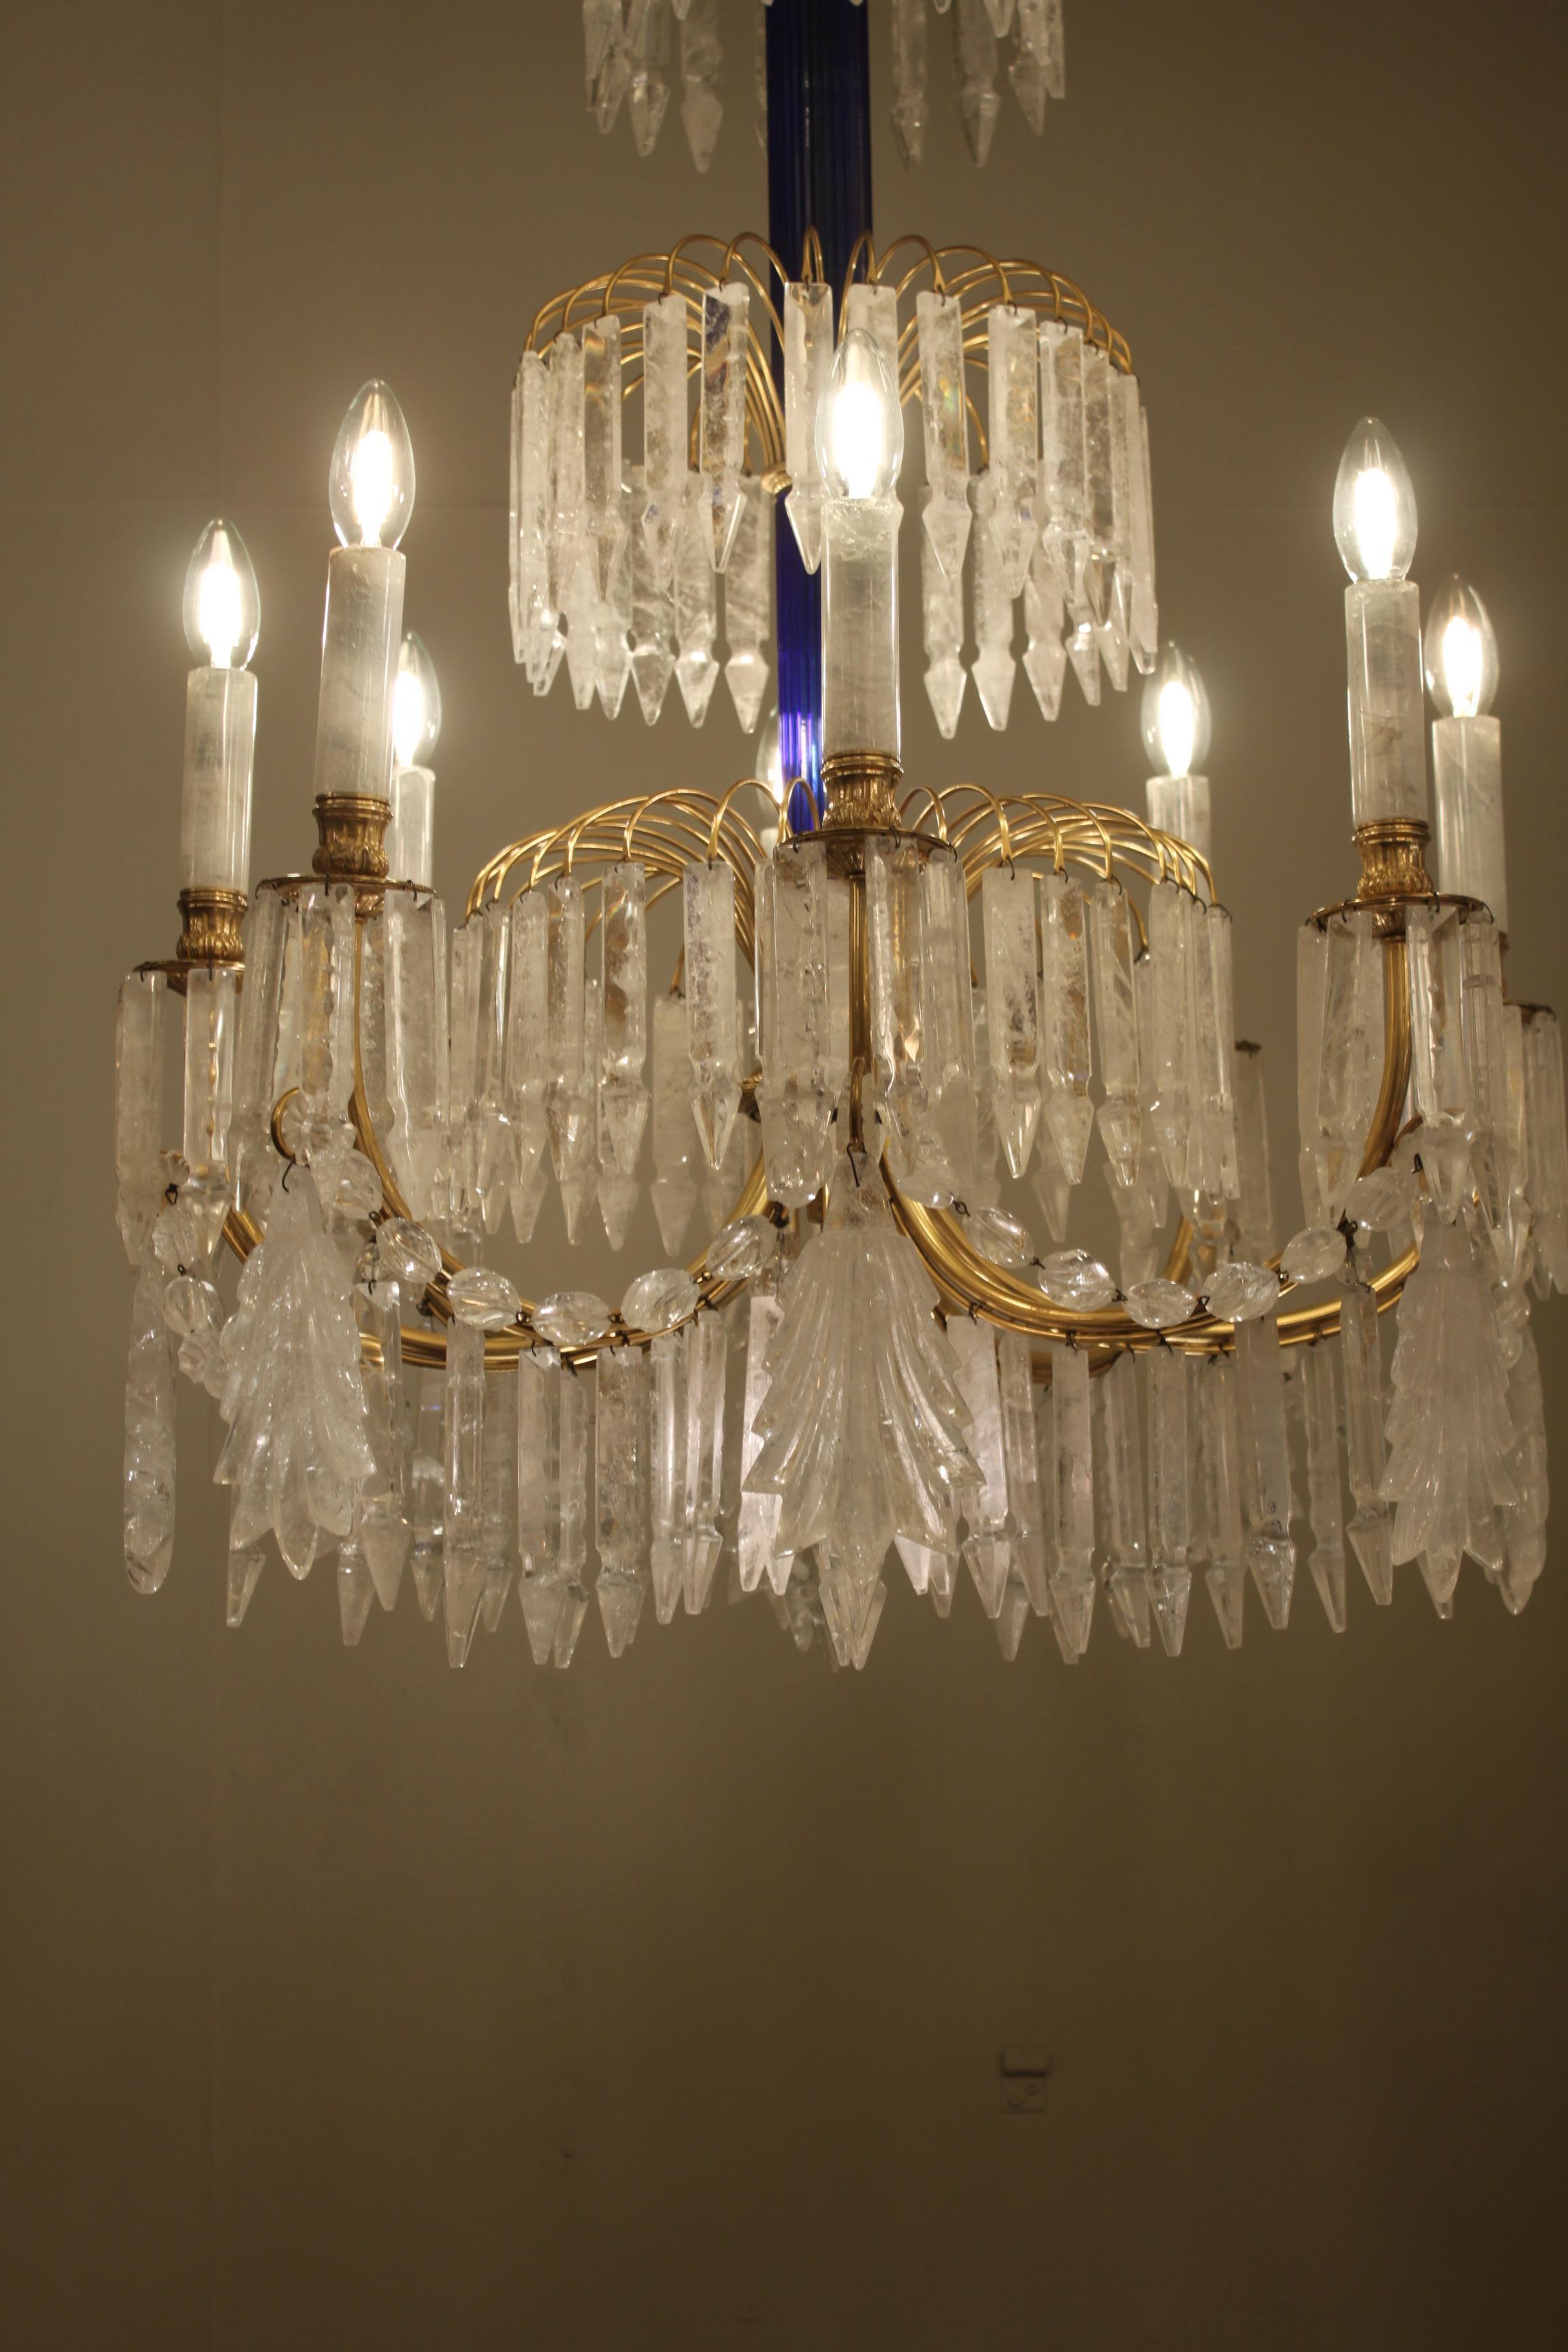 Superb Baltic Rock Crystal Chandelier with Blue Stem In Excellent Condition For Sale In London, GB